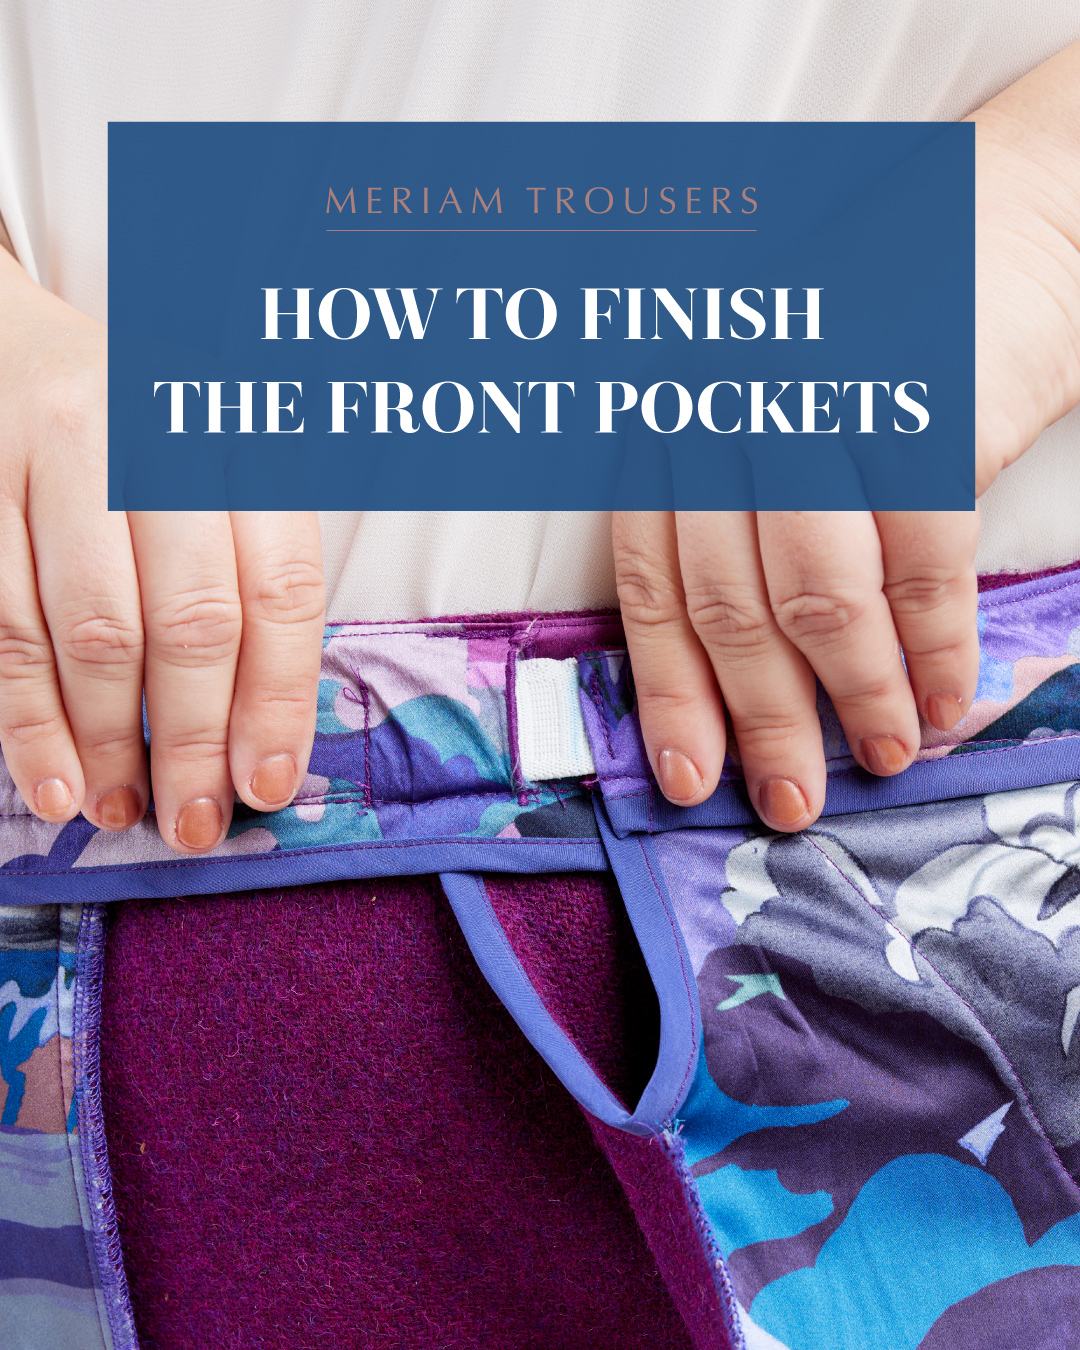 How to finish the front pockets of the Meriam Trousers